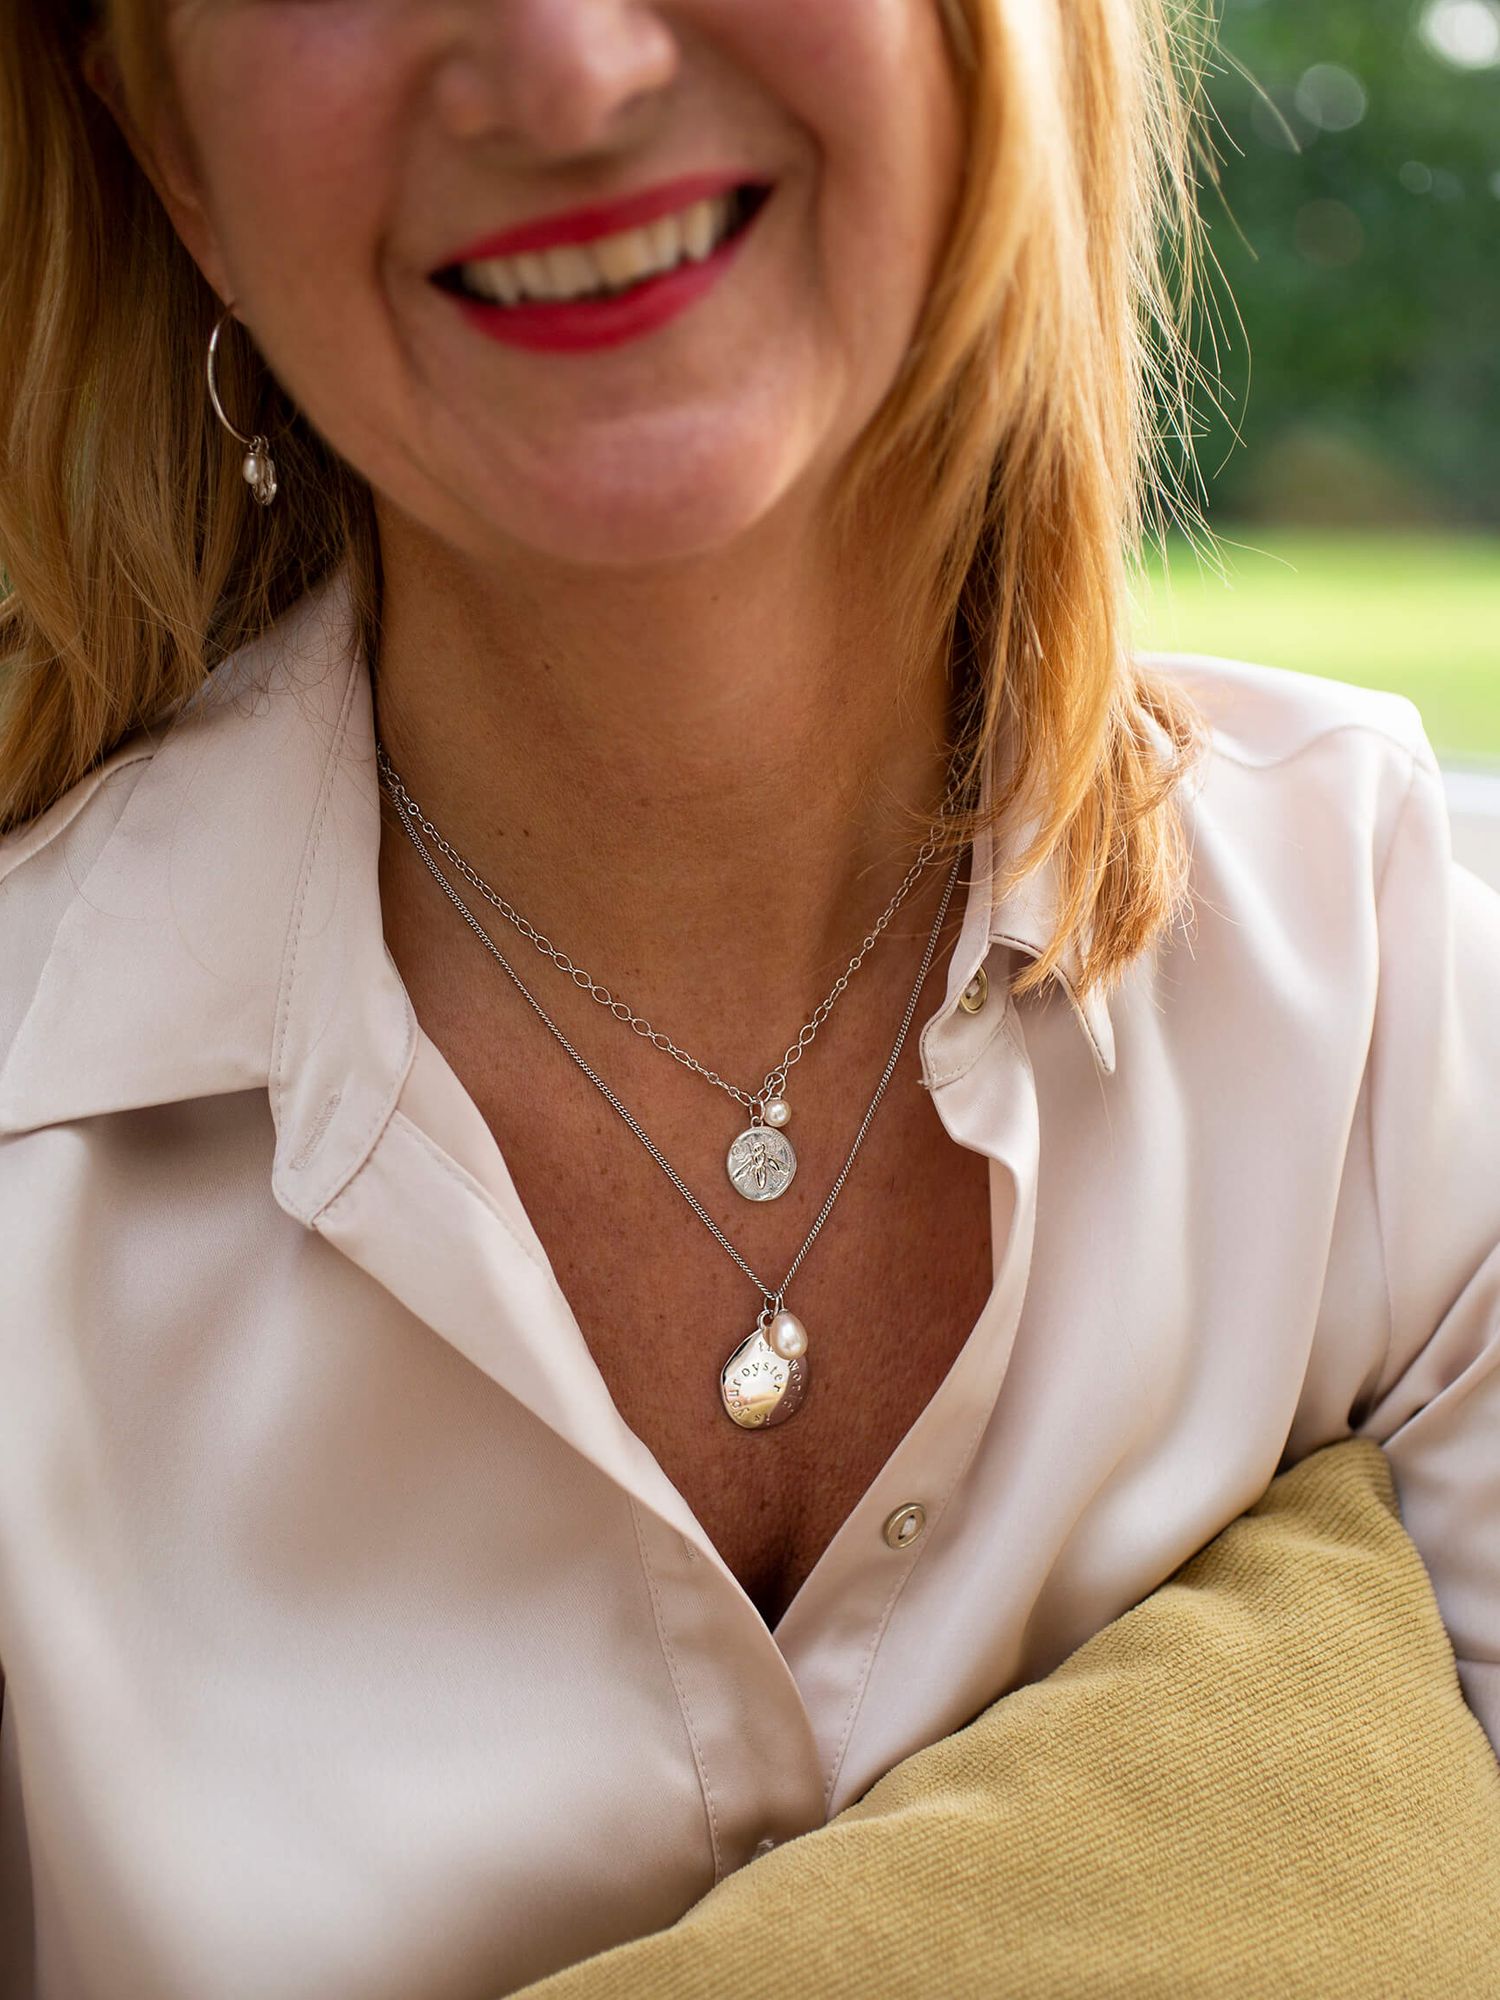 Buy Claudia Bradby The World is Your Oyster Pearl Disc Pendant Necklace, Silver Online at johnlewis.com